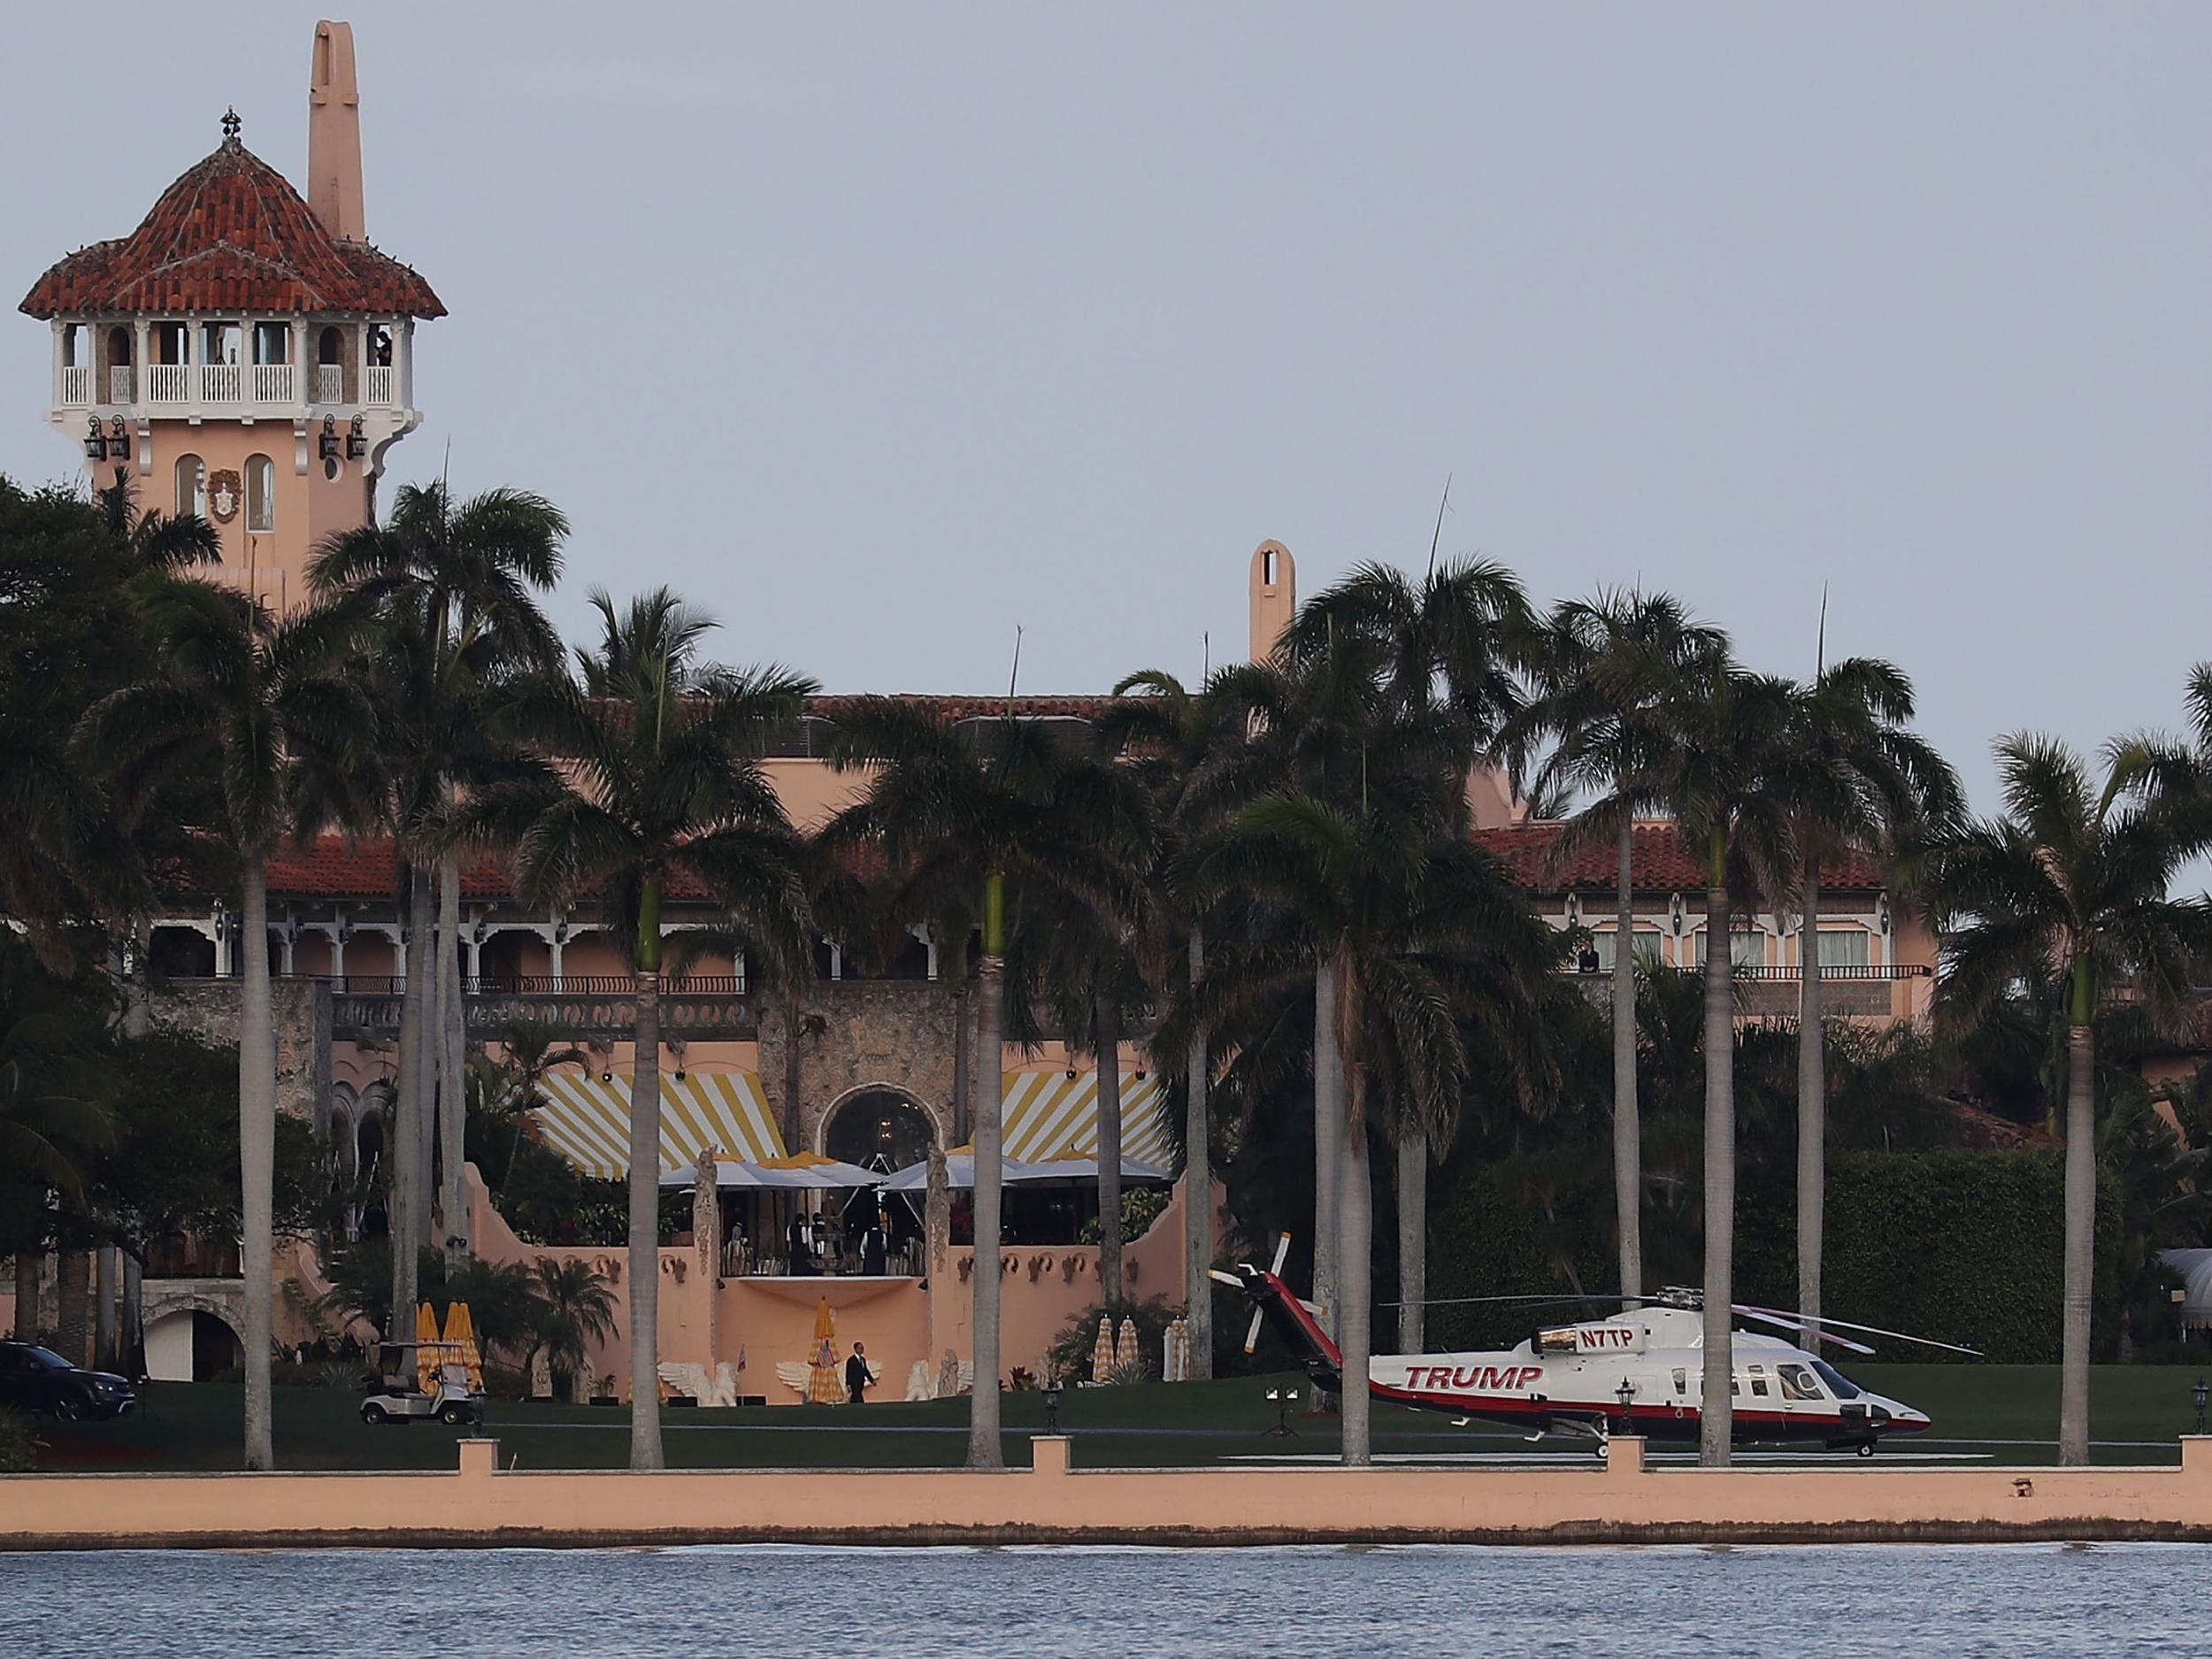 Irma potentially threatens Donald Trump's infamous Mar-a-Lago club and three of his golf courses